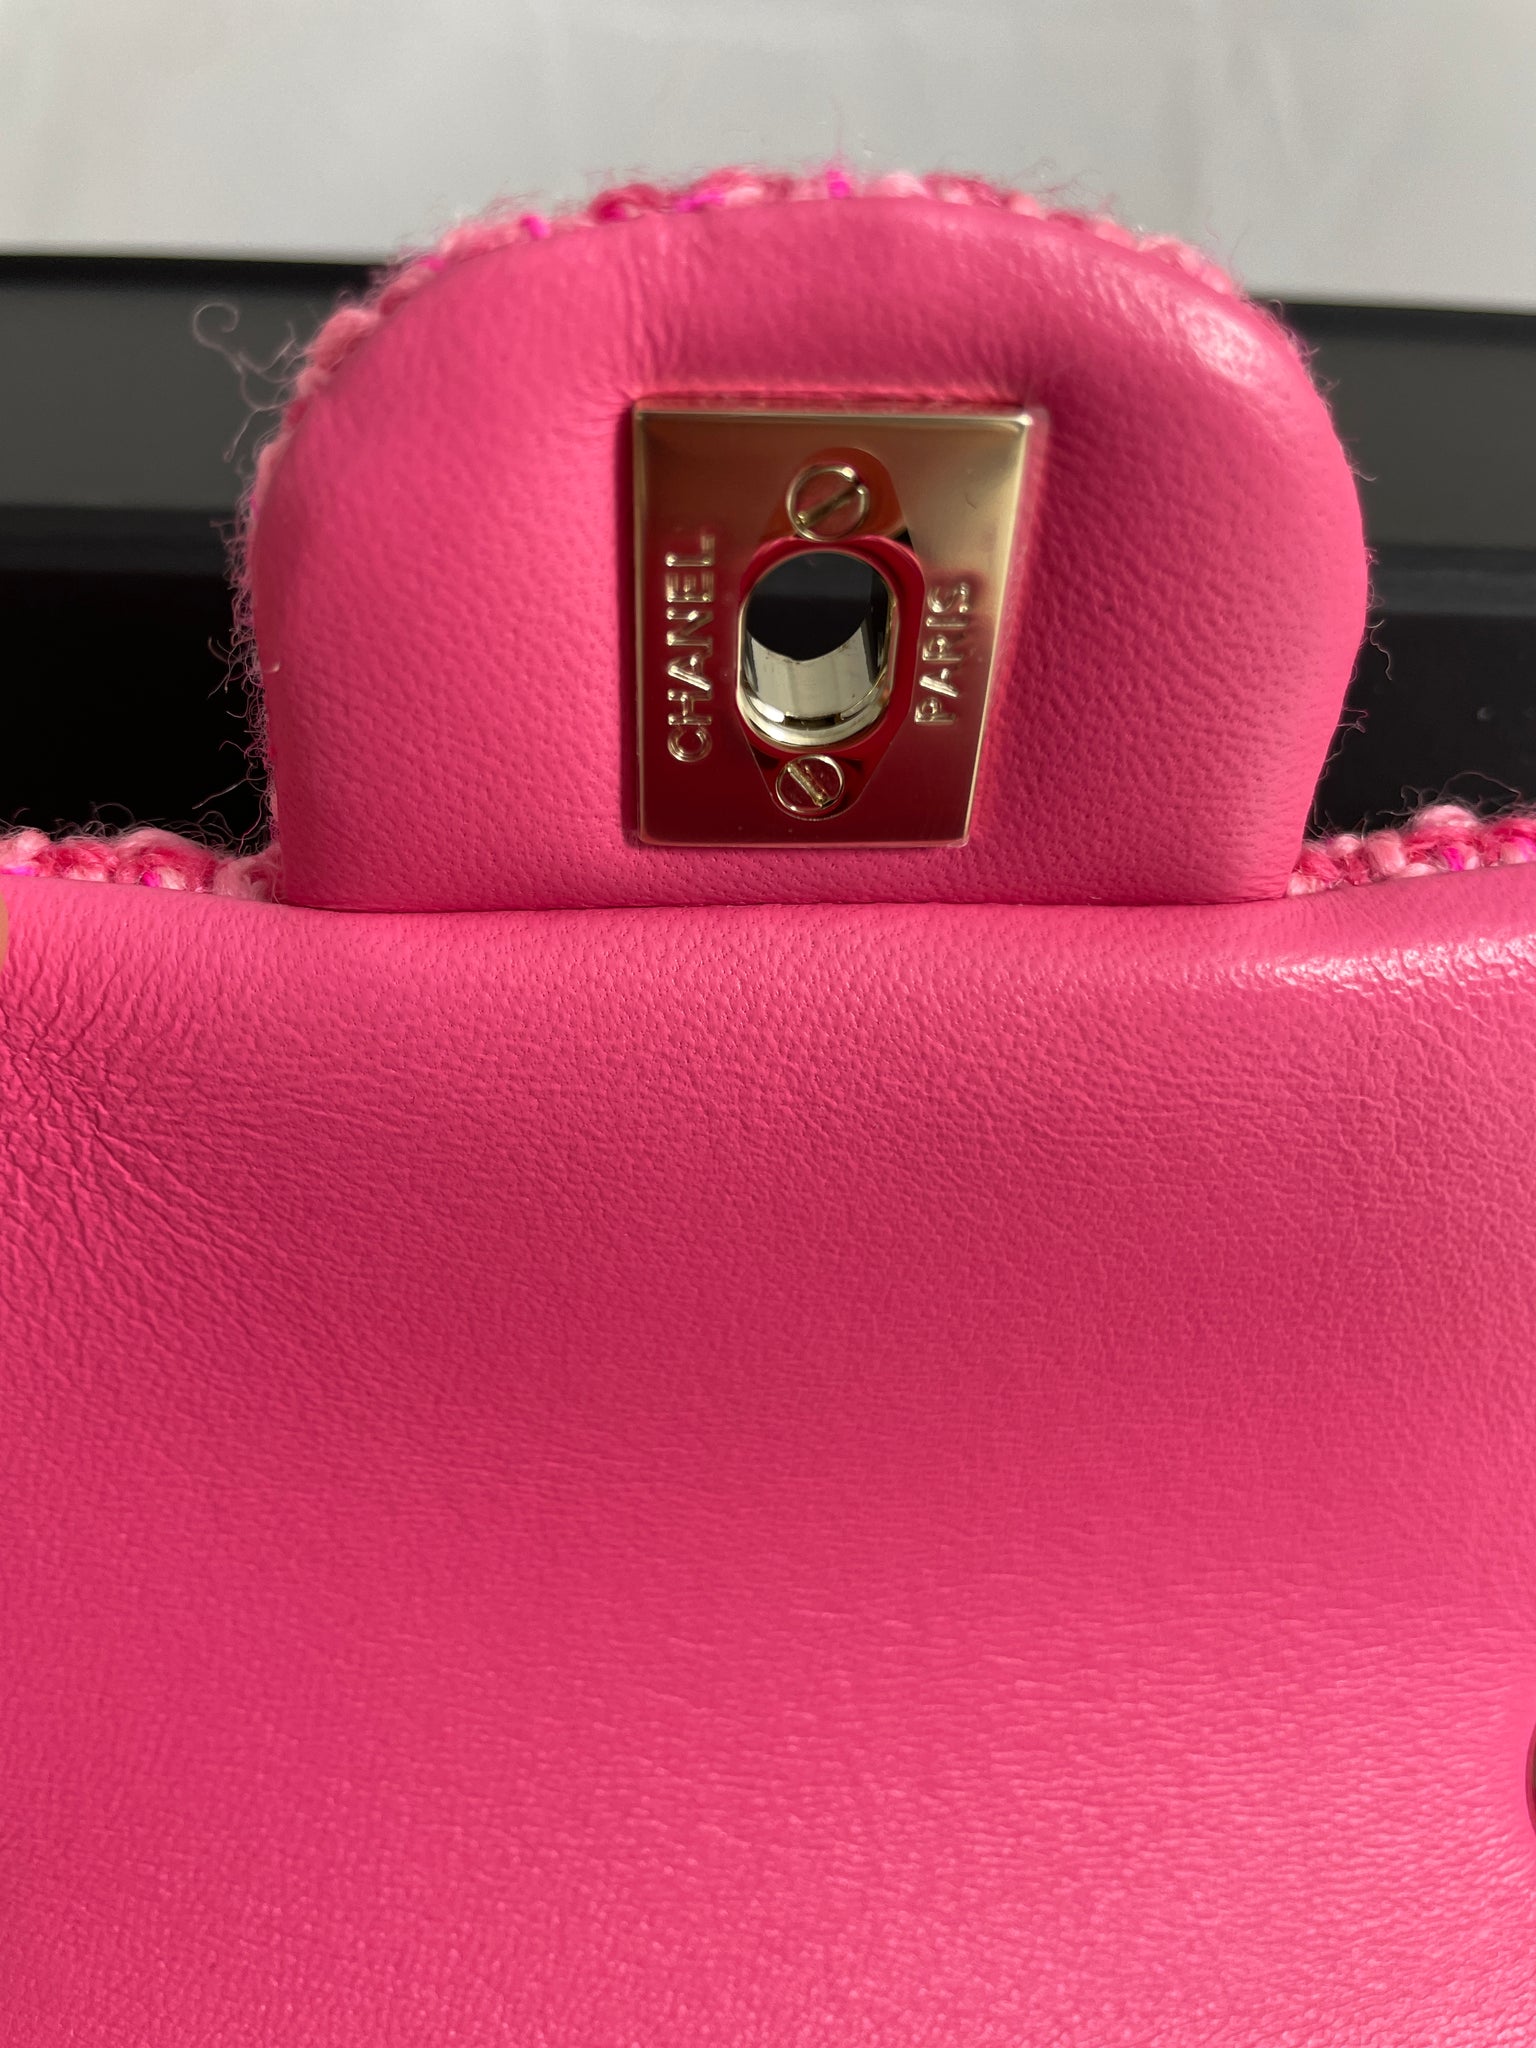 Chanel Coral Pink Mini Kelly Bag – The Closet